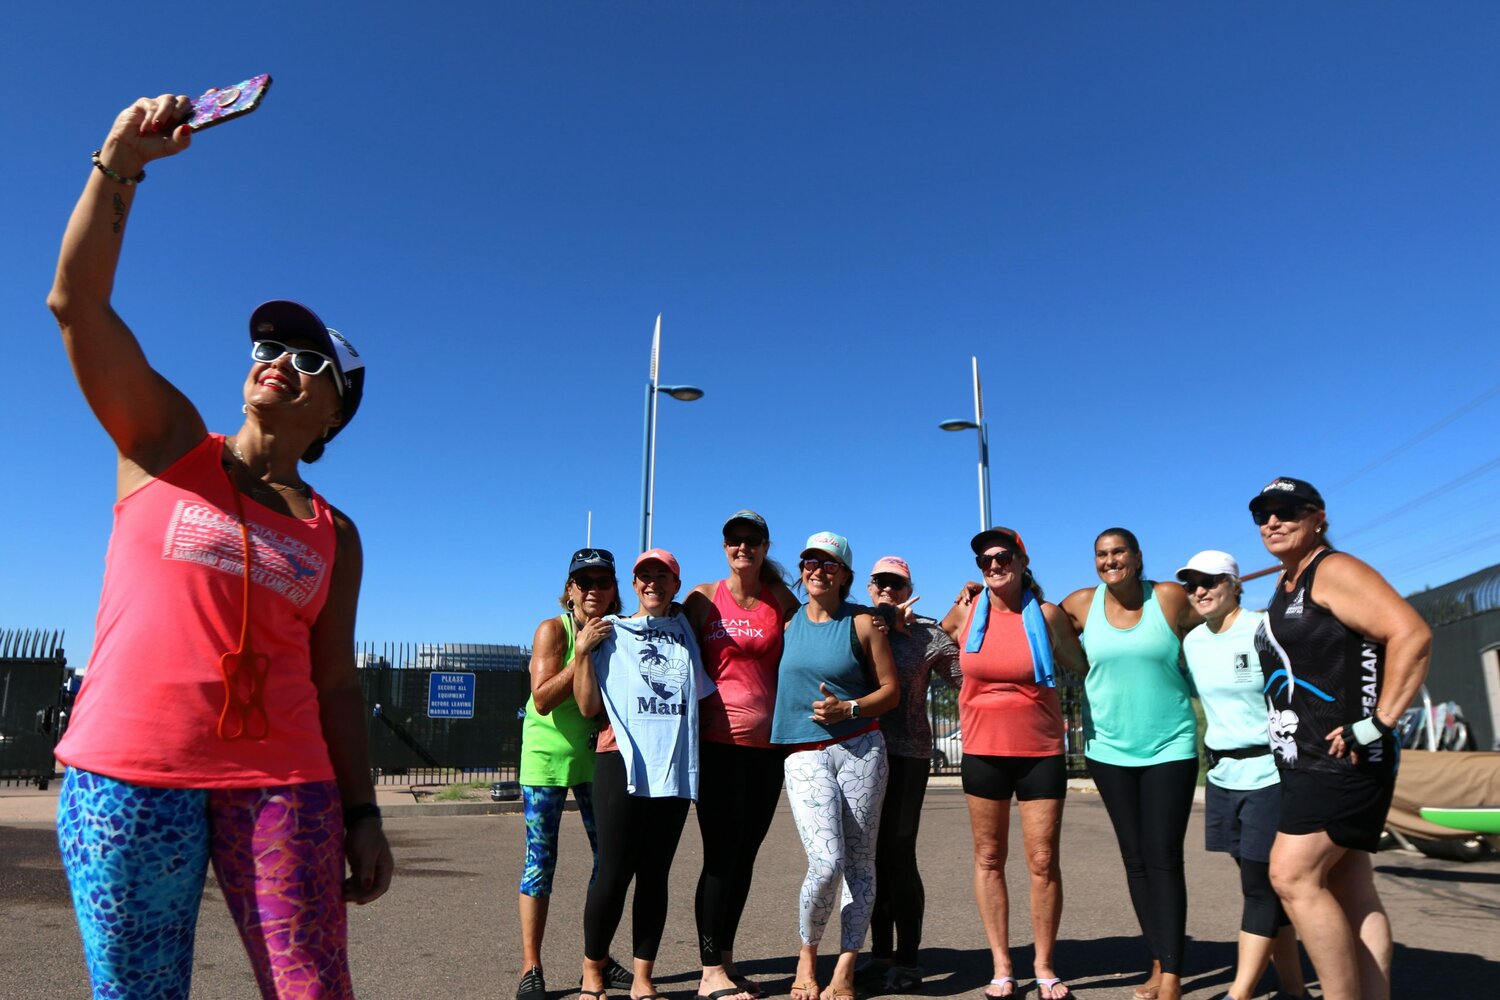 Betty Flores, a member of Na Leo ’O Ke Kai, takes a selfie with Na Leo and TAZ members at Tempe Town Lake on Sept. 30, 2023. “All the different clubs, even though we race against each other, we’re all still one big family,” said Ryan Udarbe, president of Na Leo ’O Ke Kai outrigger canoe club. (Photo by Kevinjonah Paguio/Cronkite News)